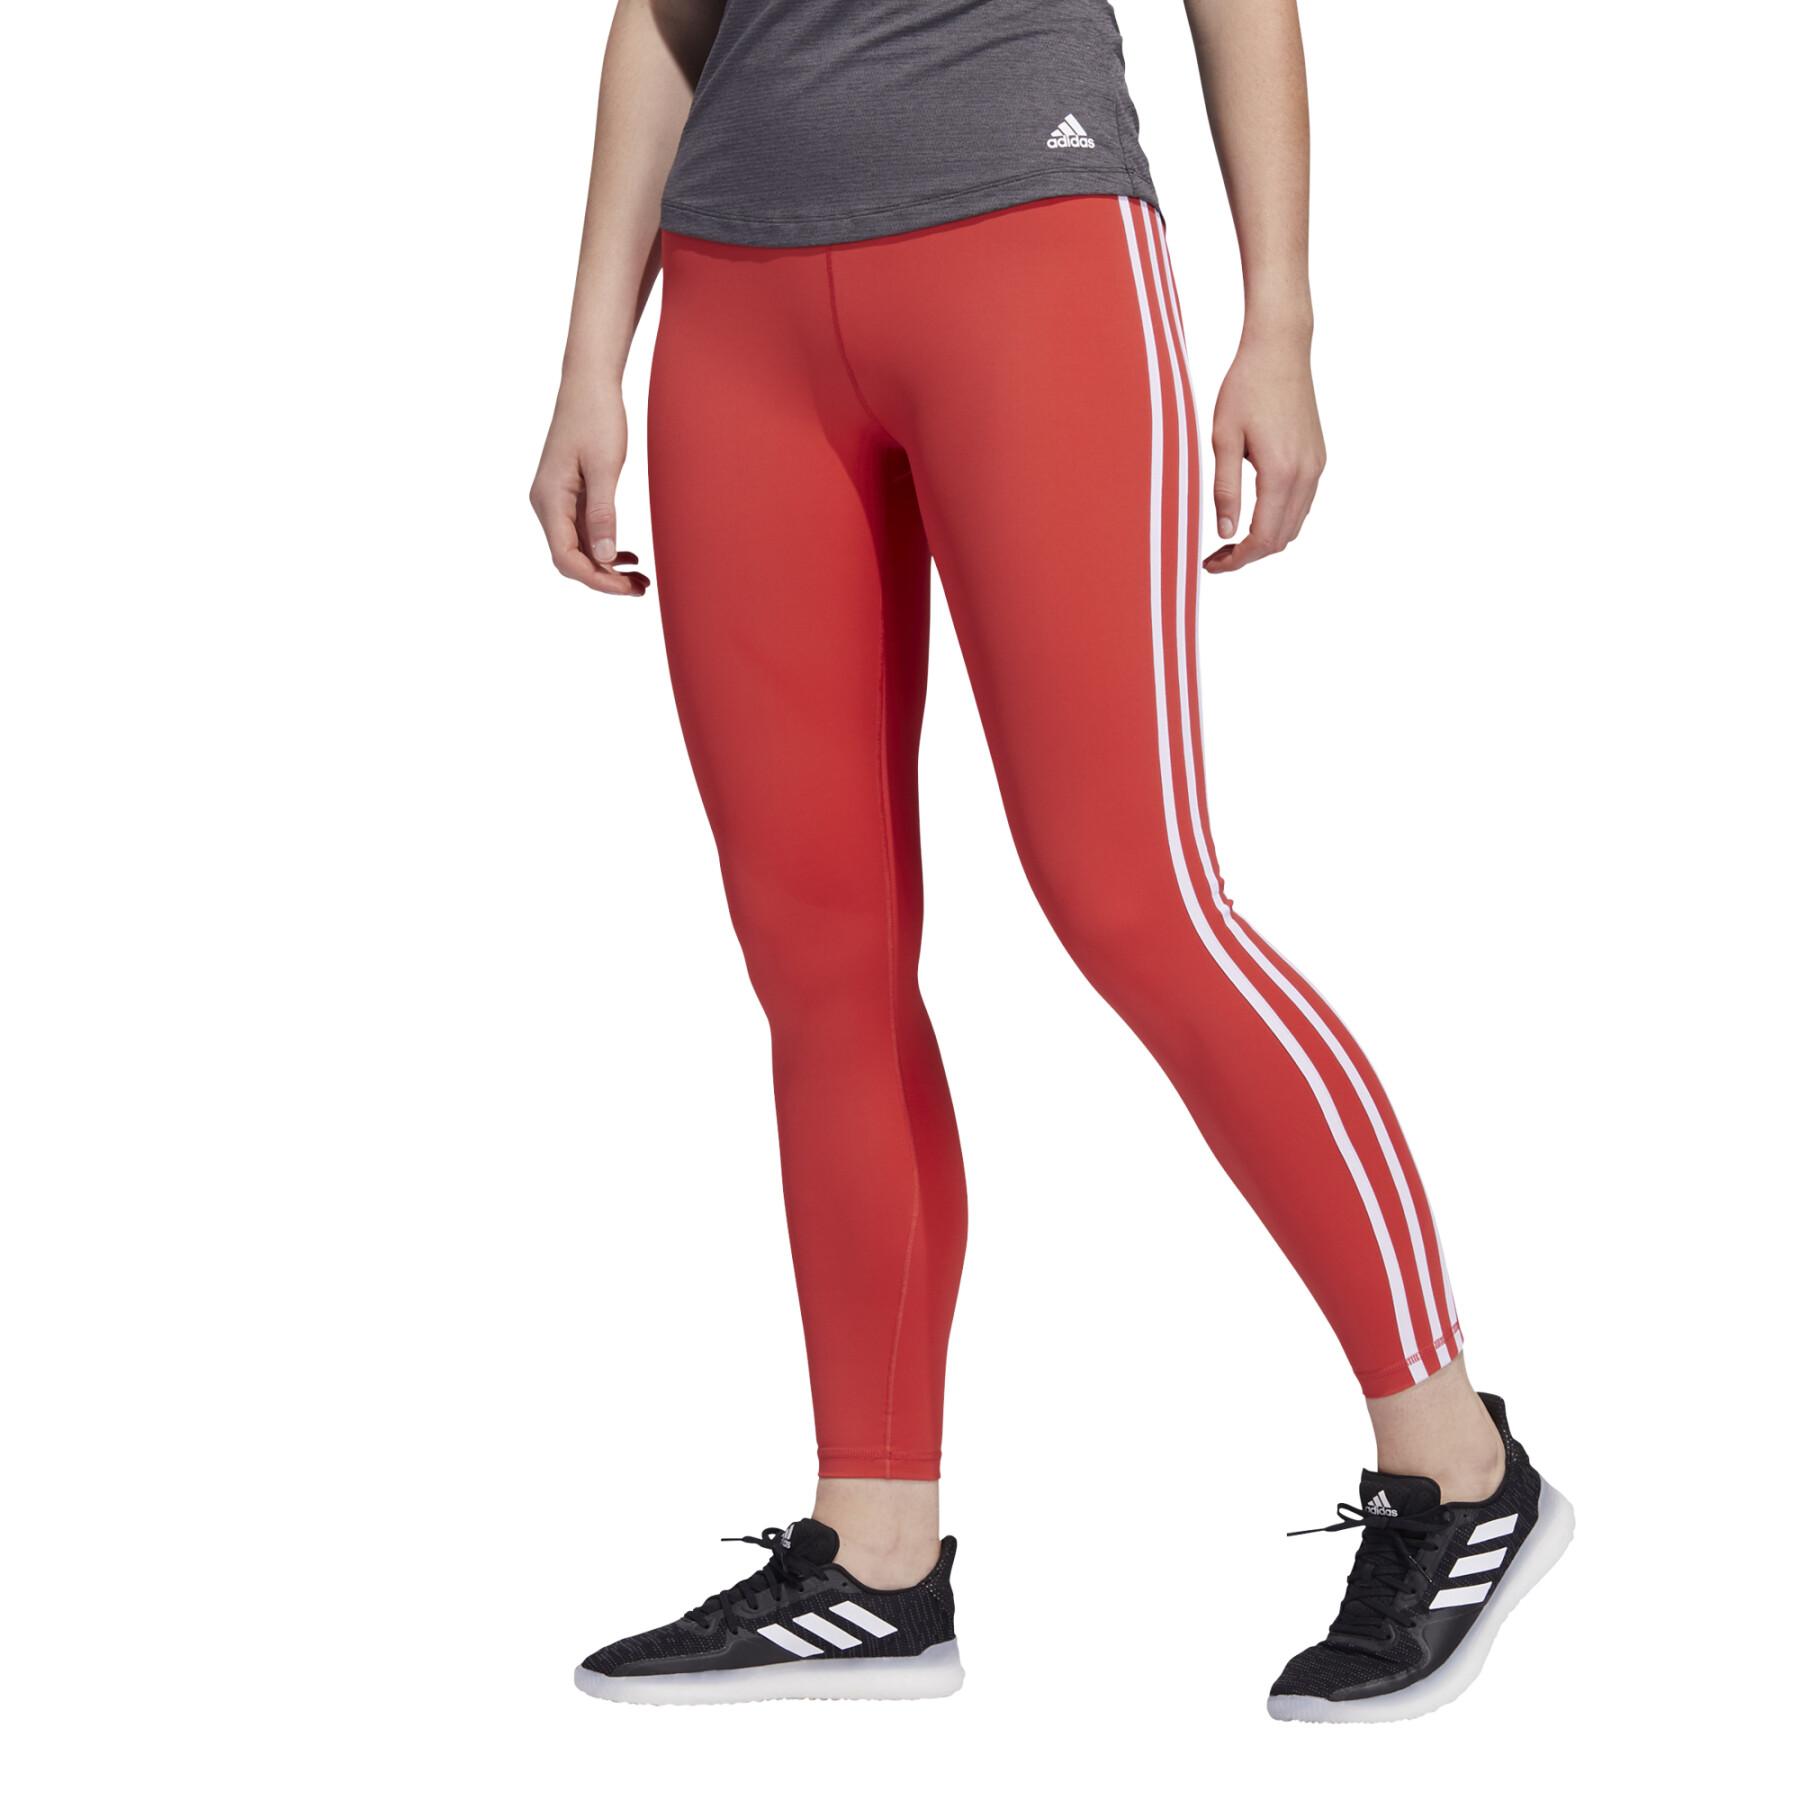 Women's tights adidas Believe This 3-Stripes